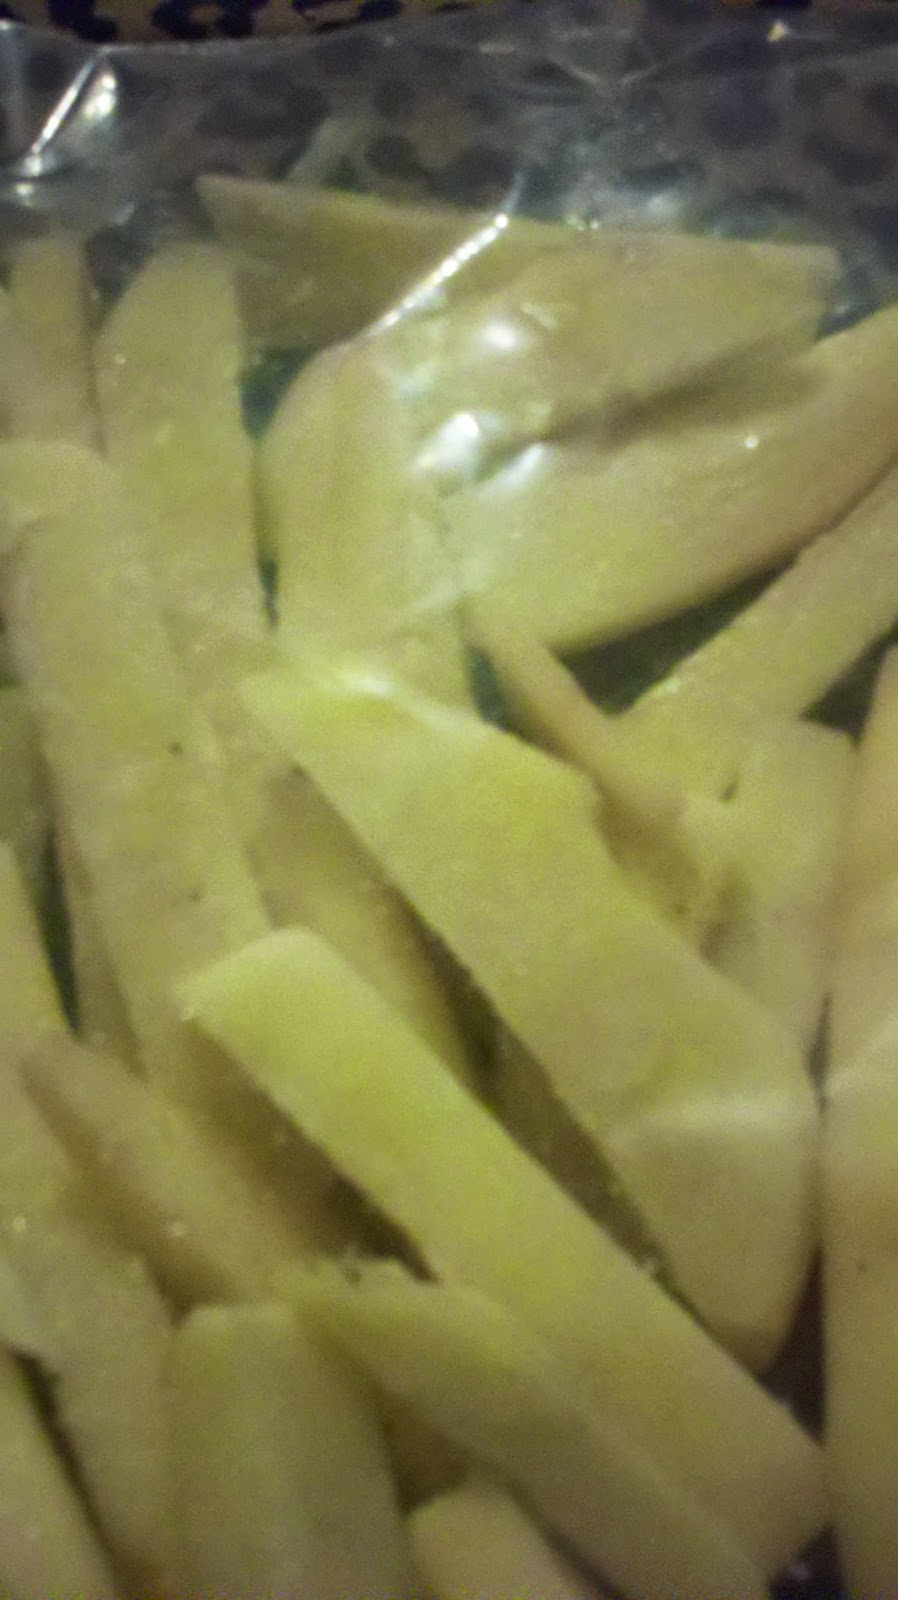 How to make and bag up french fries at home, homemade french fries,